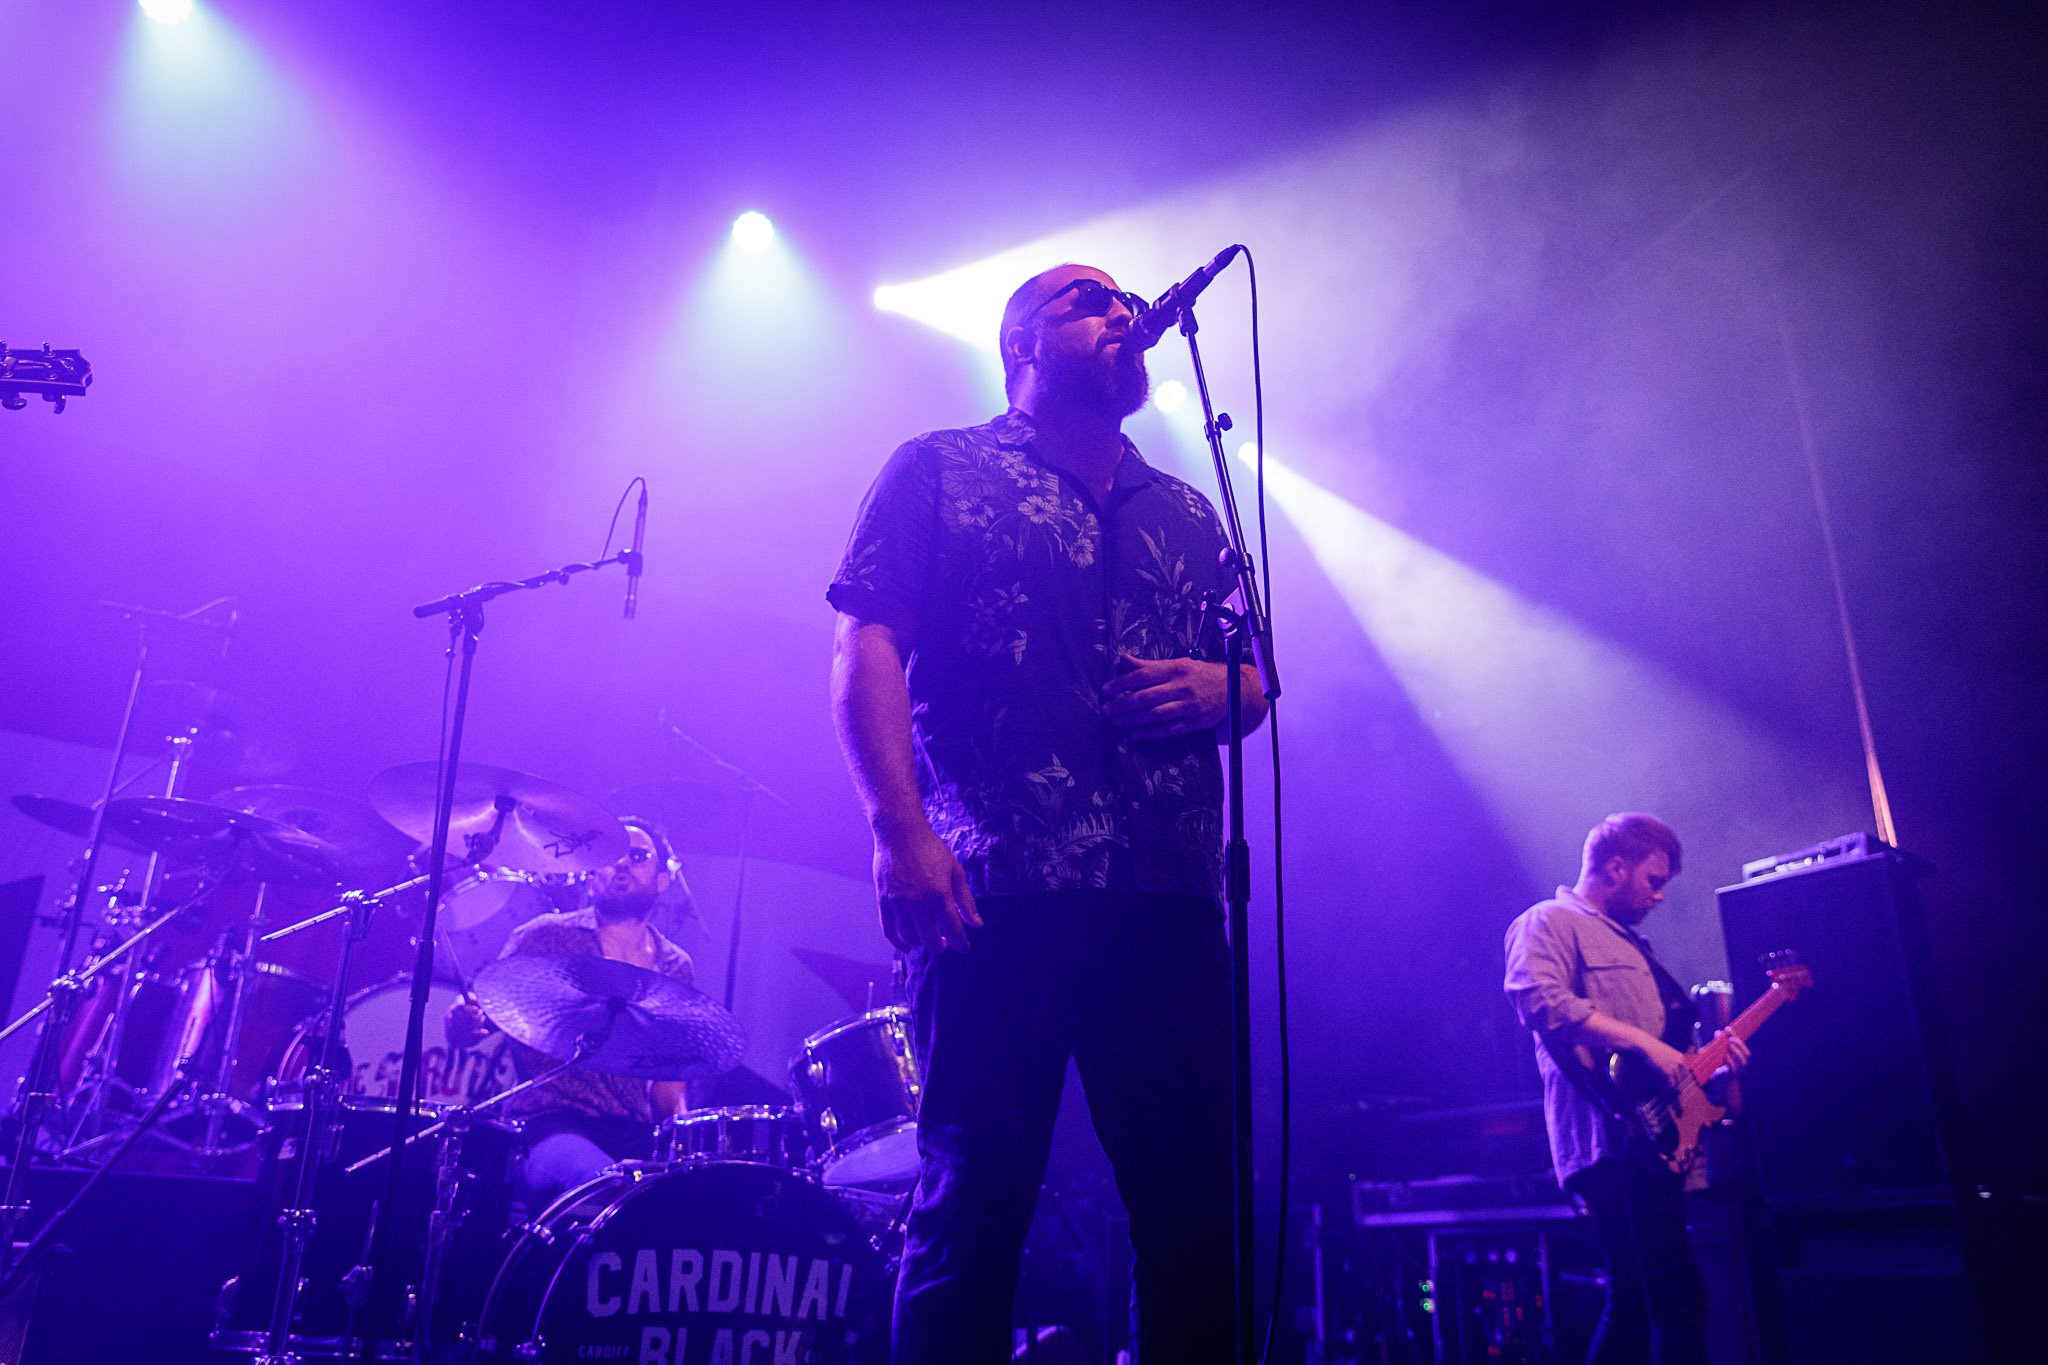 Cardinal Black at the O2 Ritz in Manchester on July 19th 2022 ©